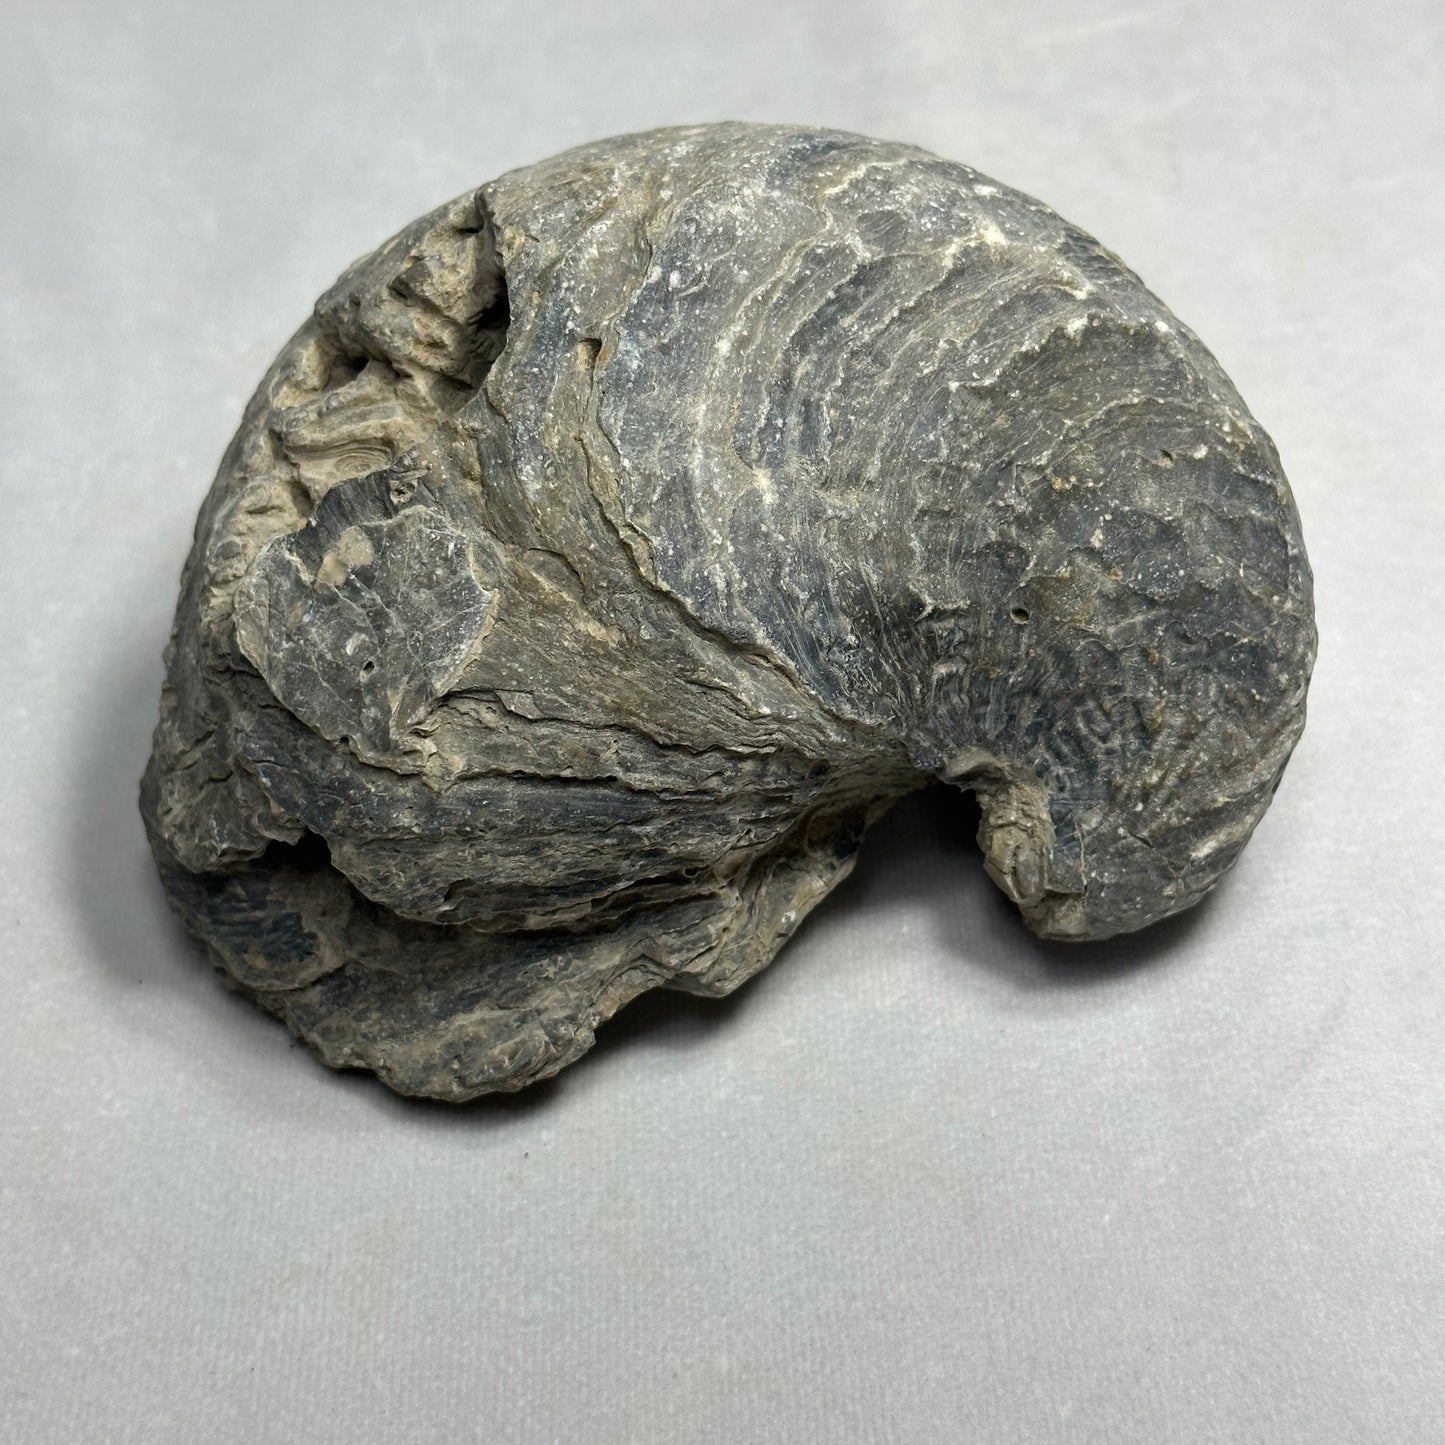 6" Fossilized Oyster